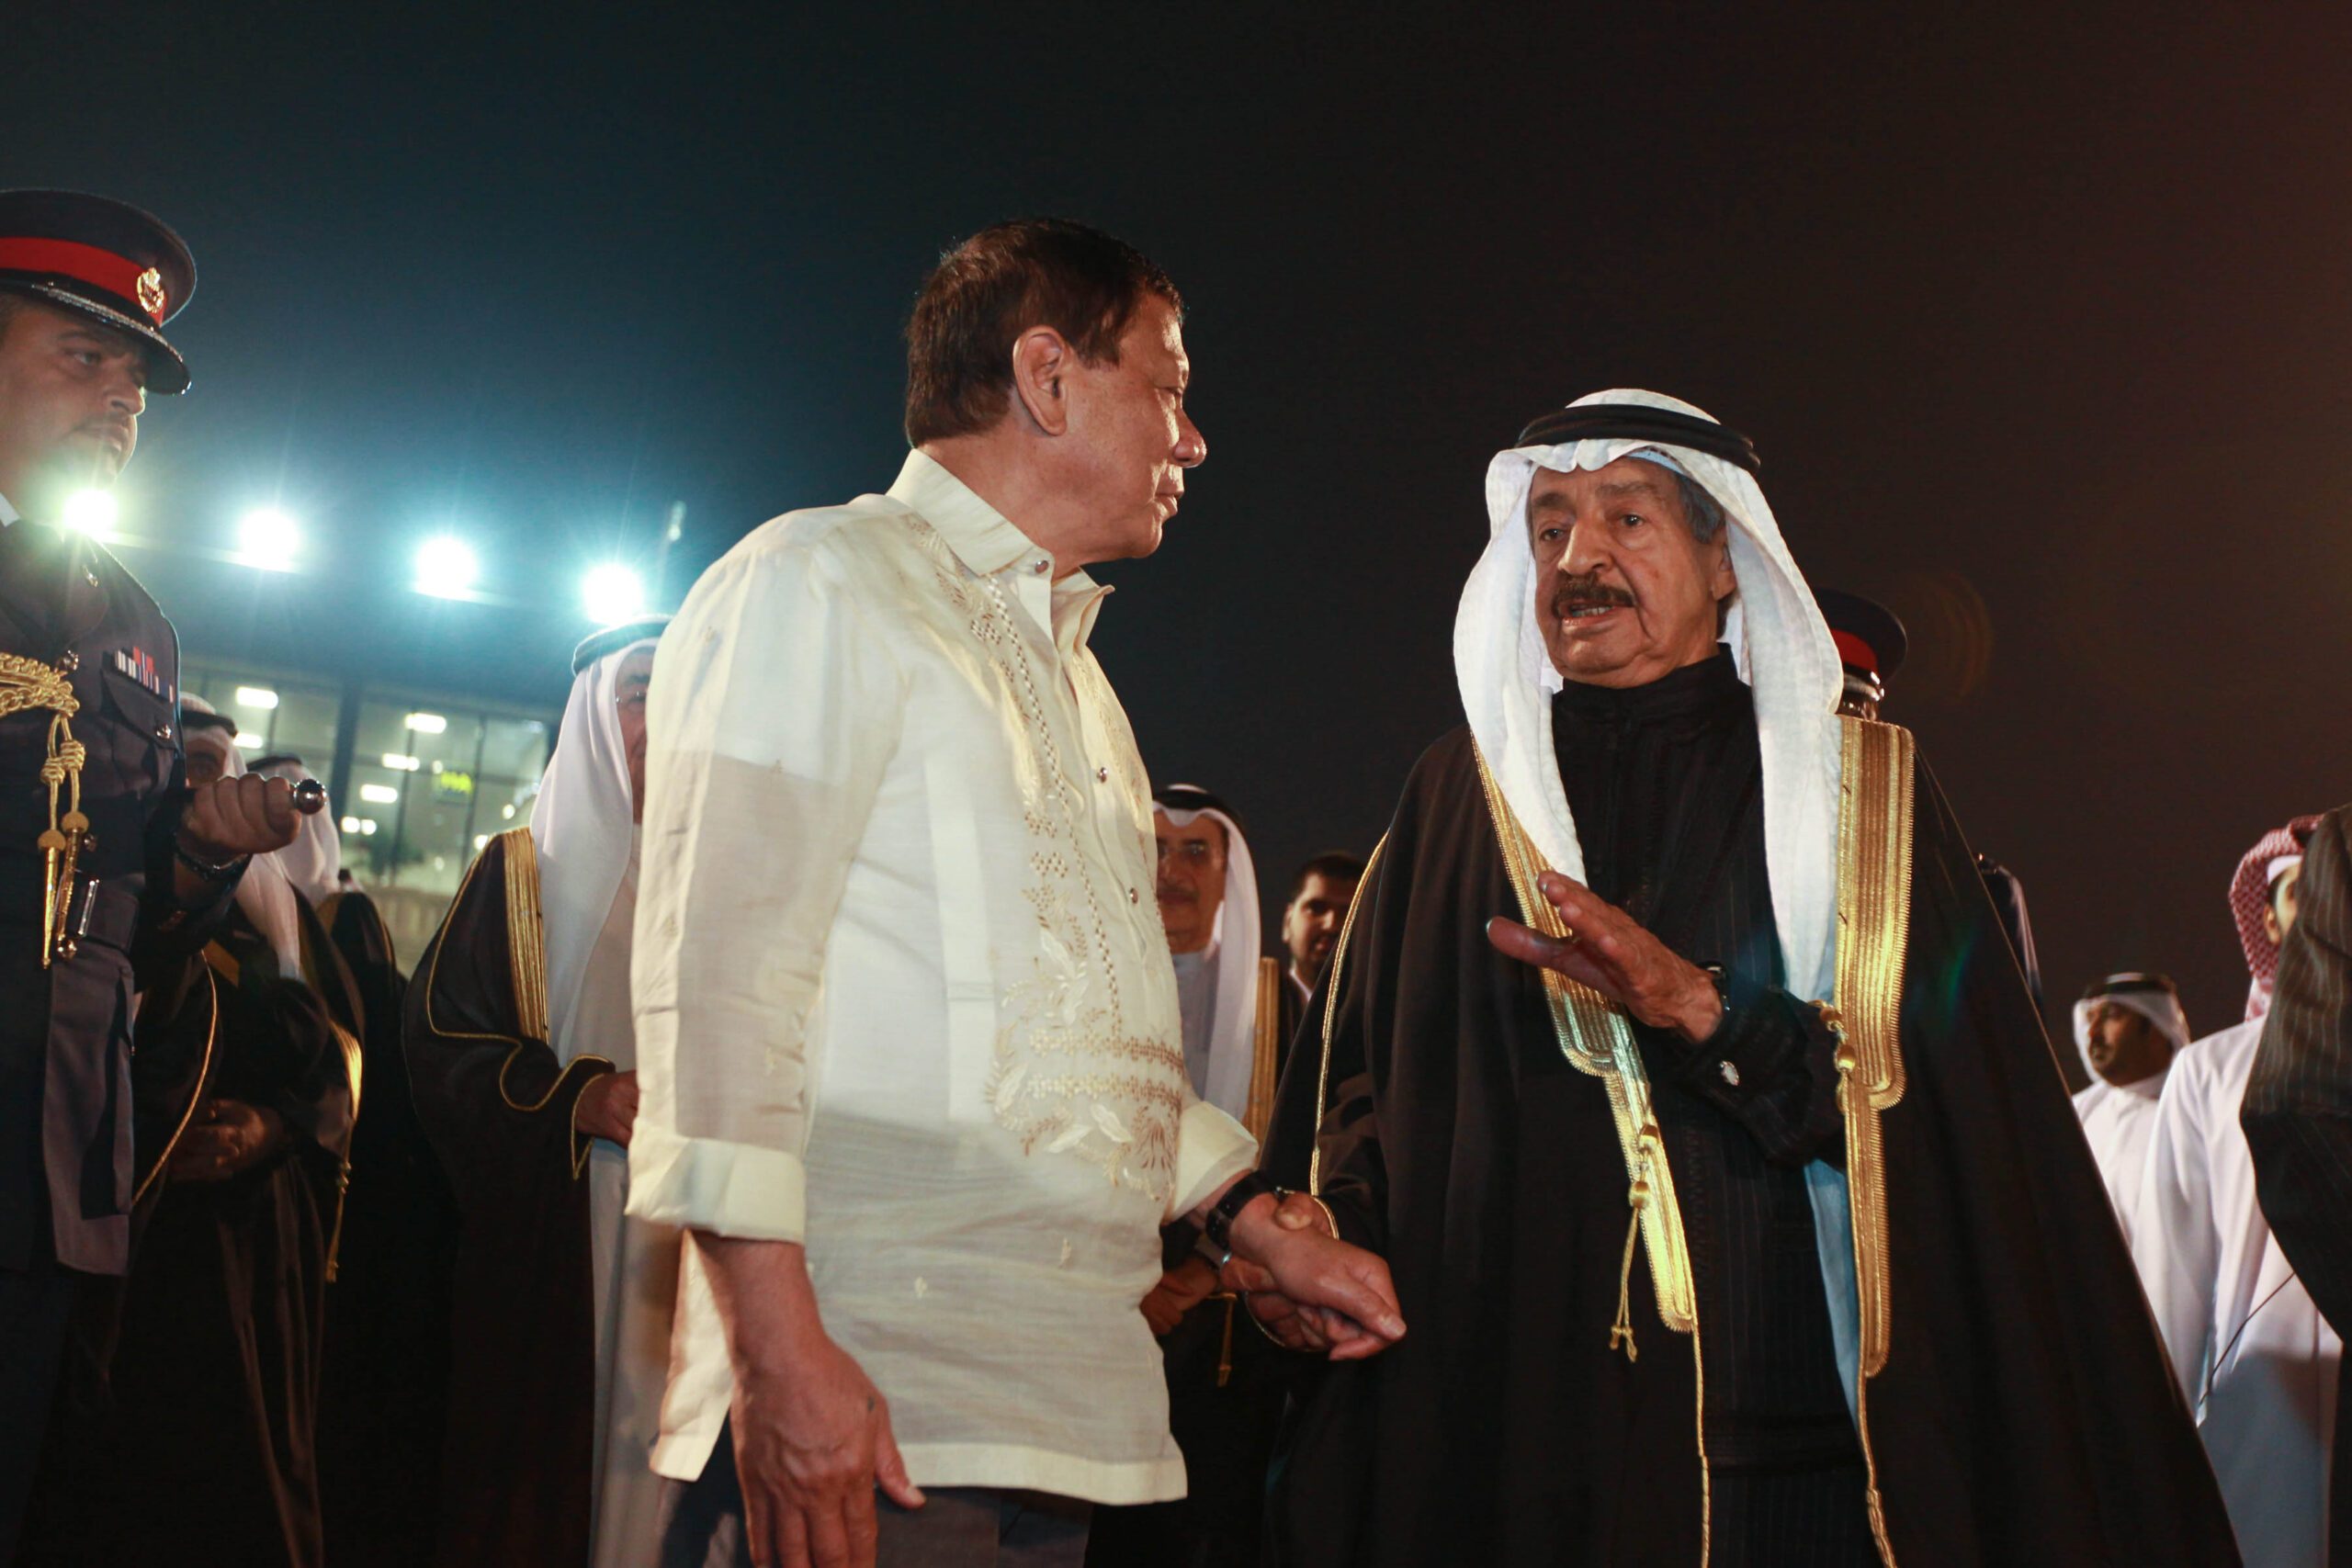 Palace denies PH troops will fight in Gulf states